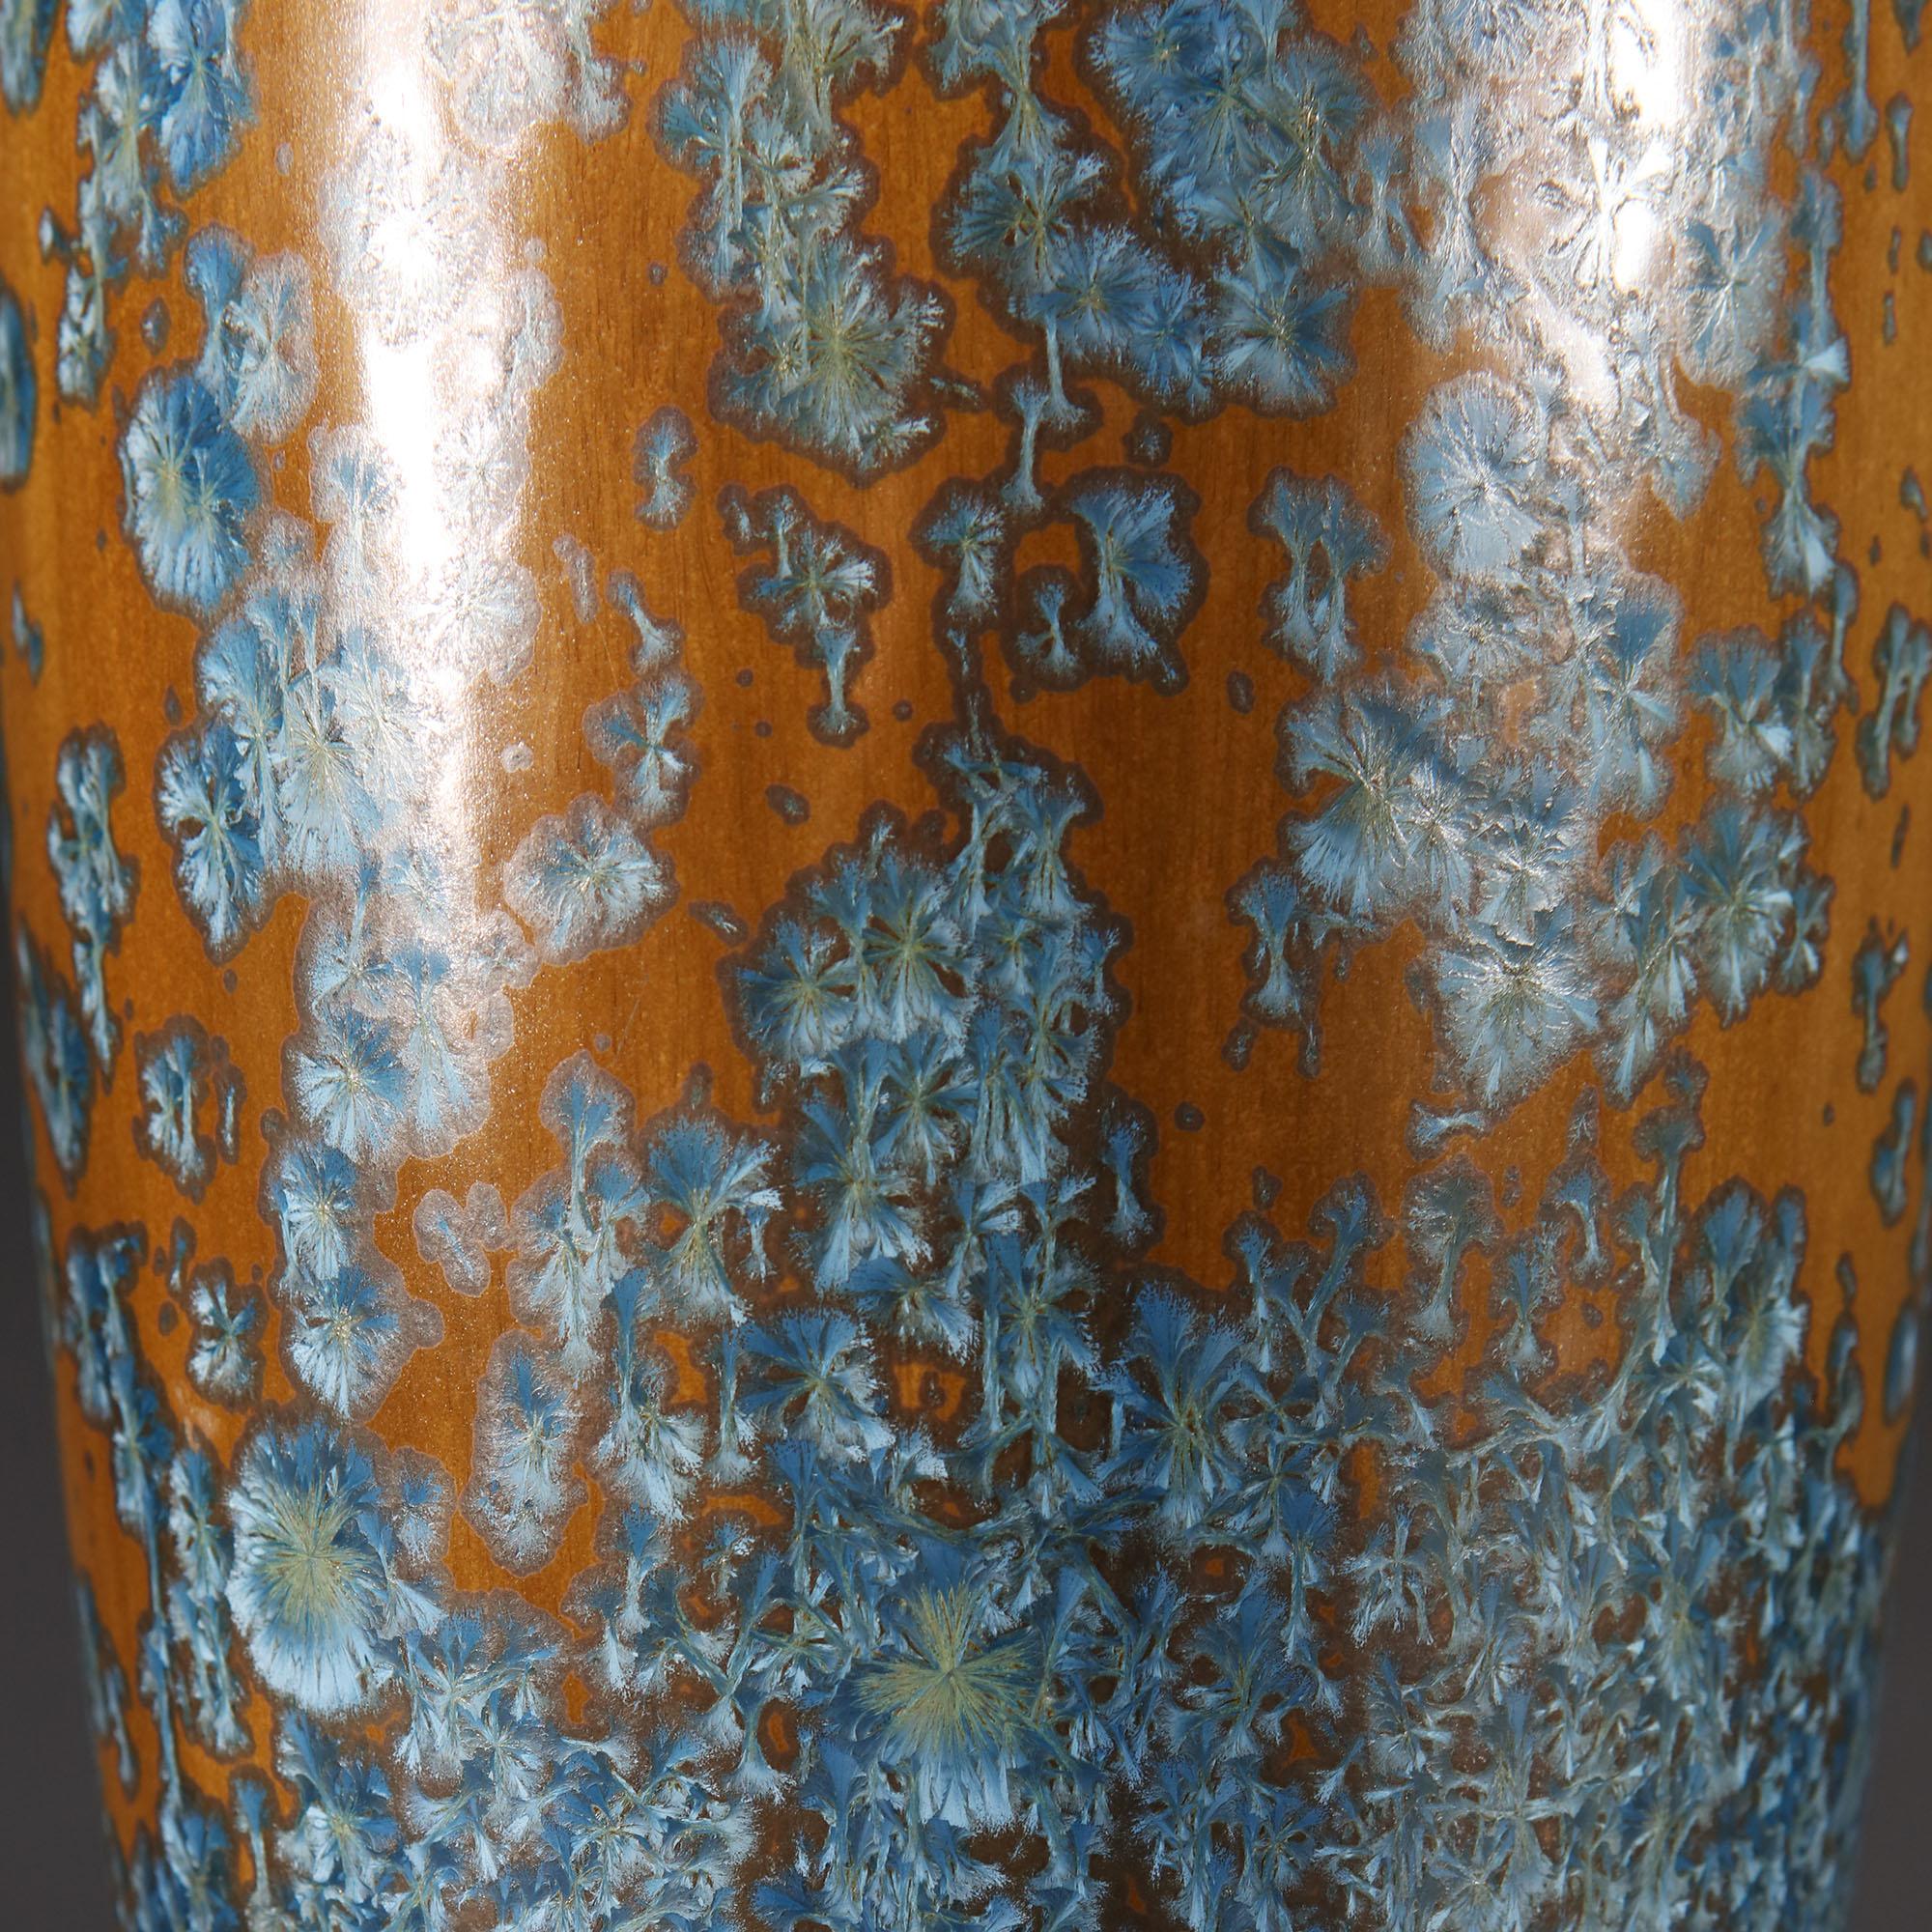 French Fine Art Pottery Vase Attributed to Pierrefonds, with Crystalline Glaze